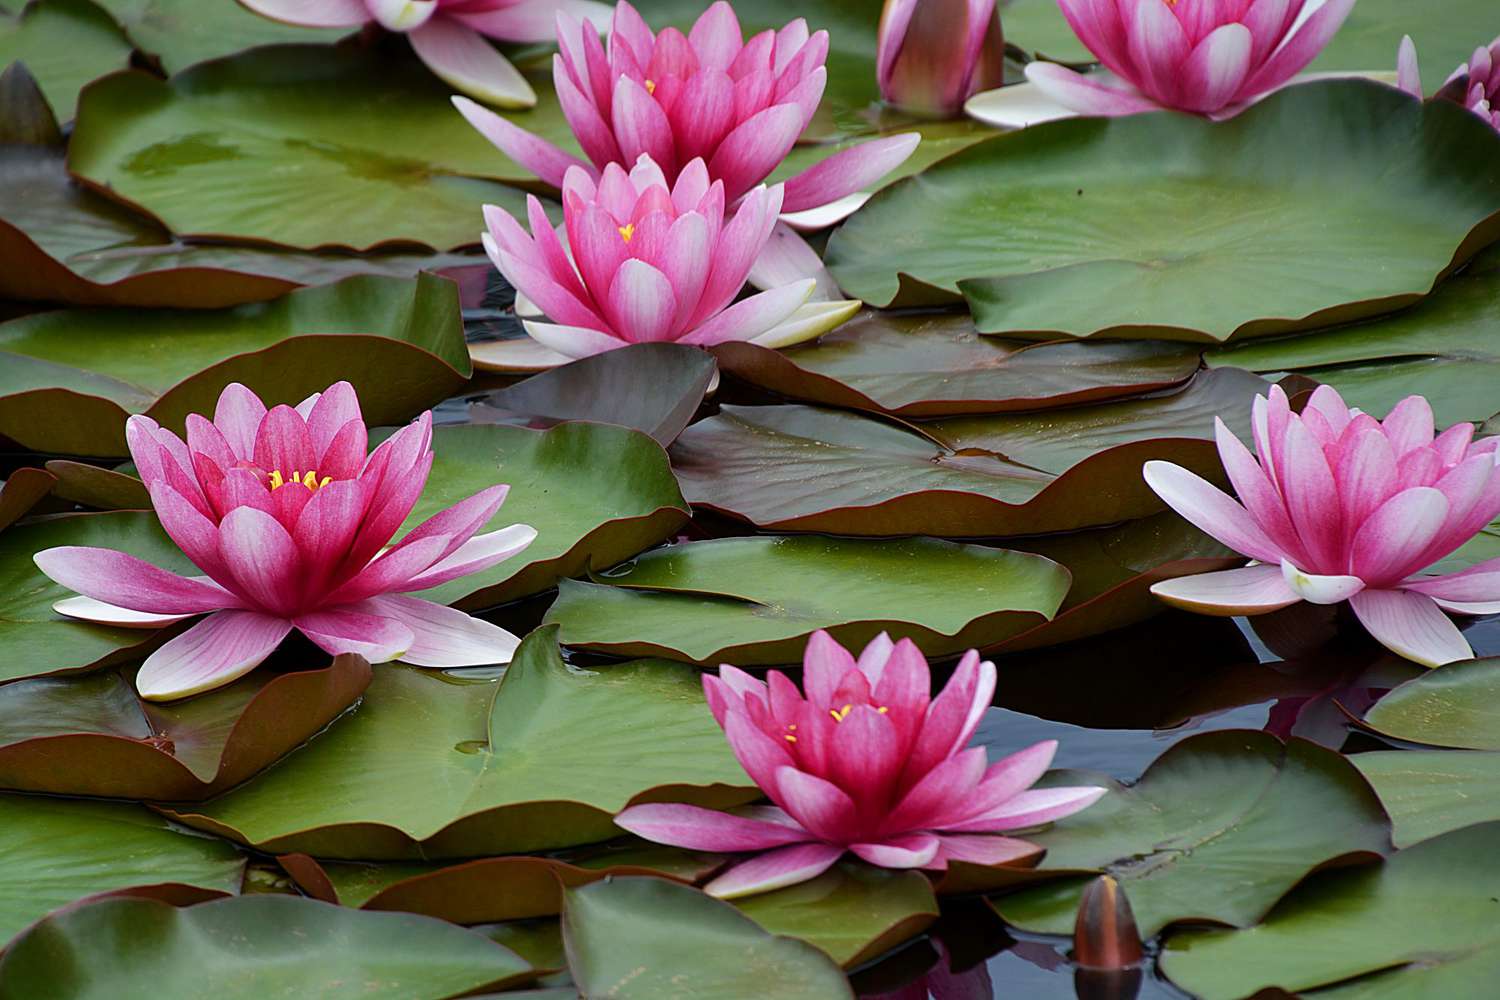 How to Care for a Water Lily?